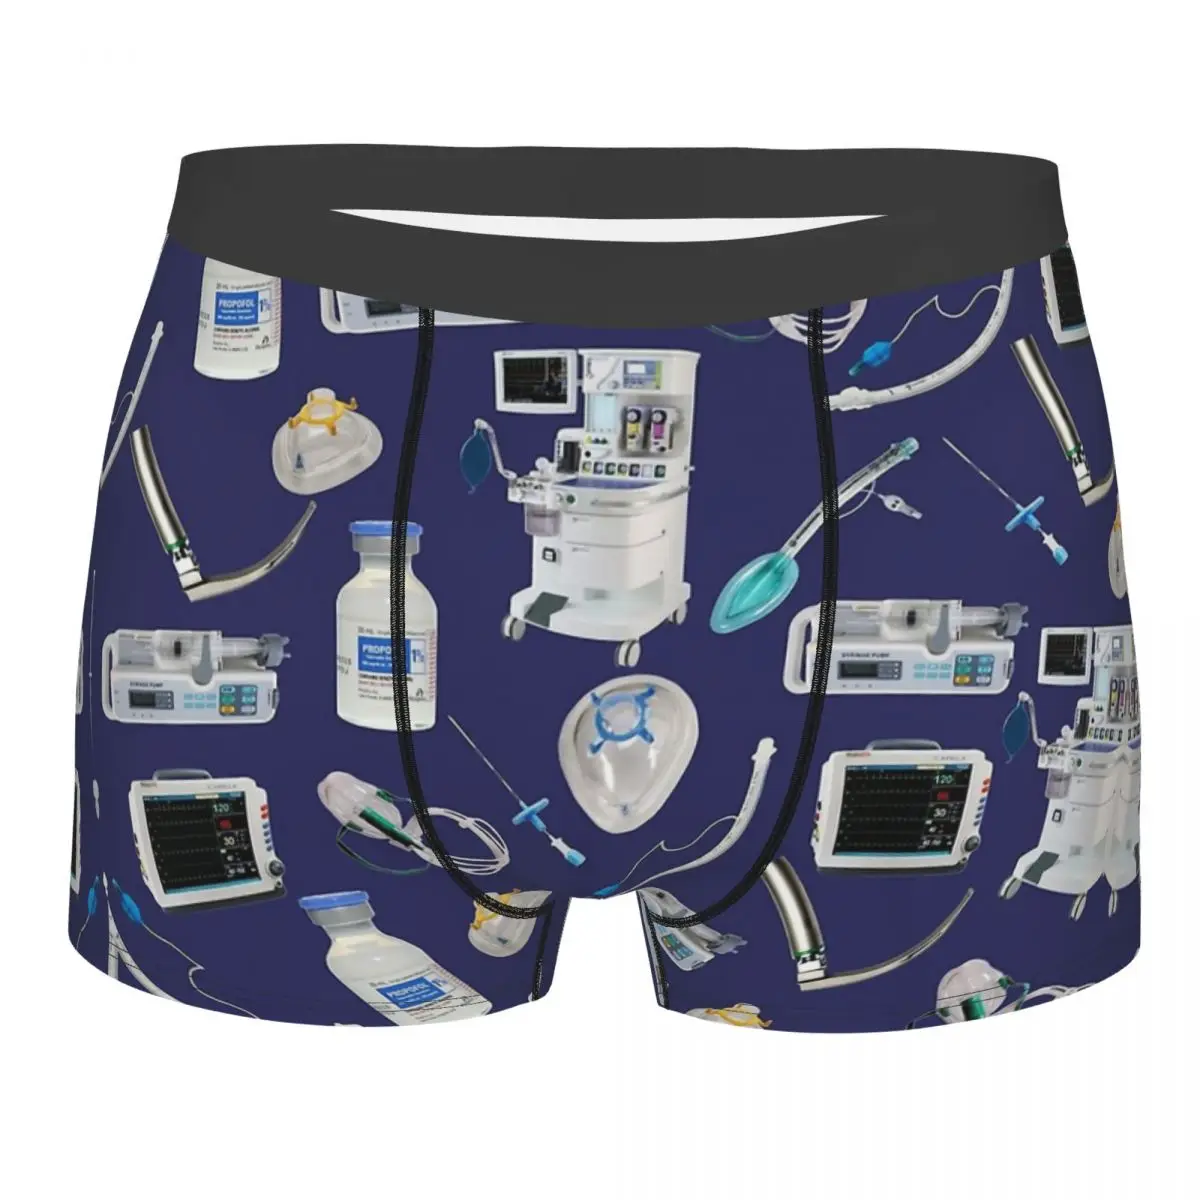 Tools Of The Trade SPACE BLUE Anesthesia Doctor 1 Men Boxer Briefs Underwear Highly Breathable Top Quality Birthday Gifts guci chinese and western ceramic fruit plate quality porcelain jingdezhen hand painted blue and white classic foreign trade